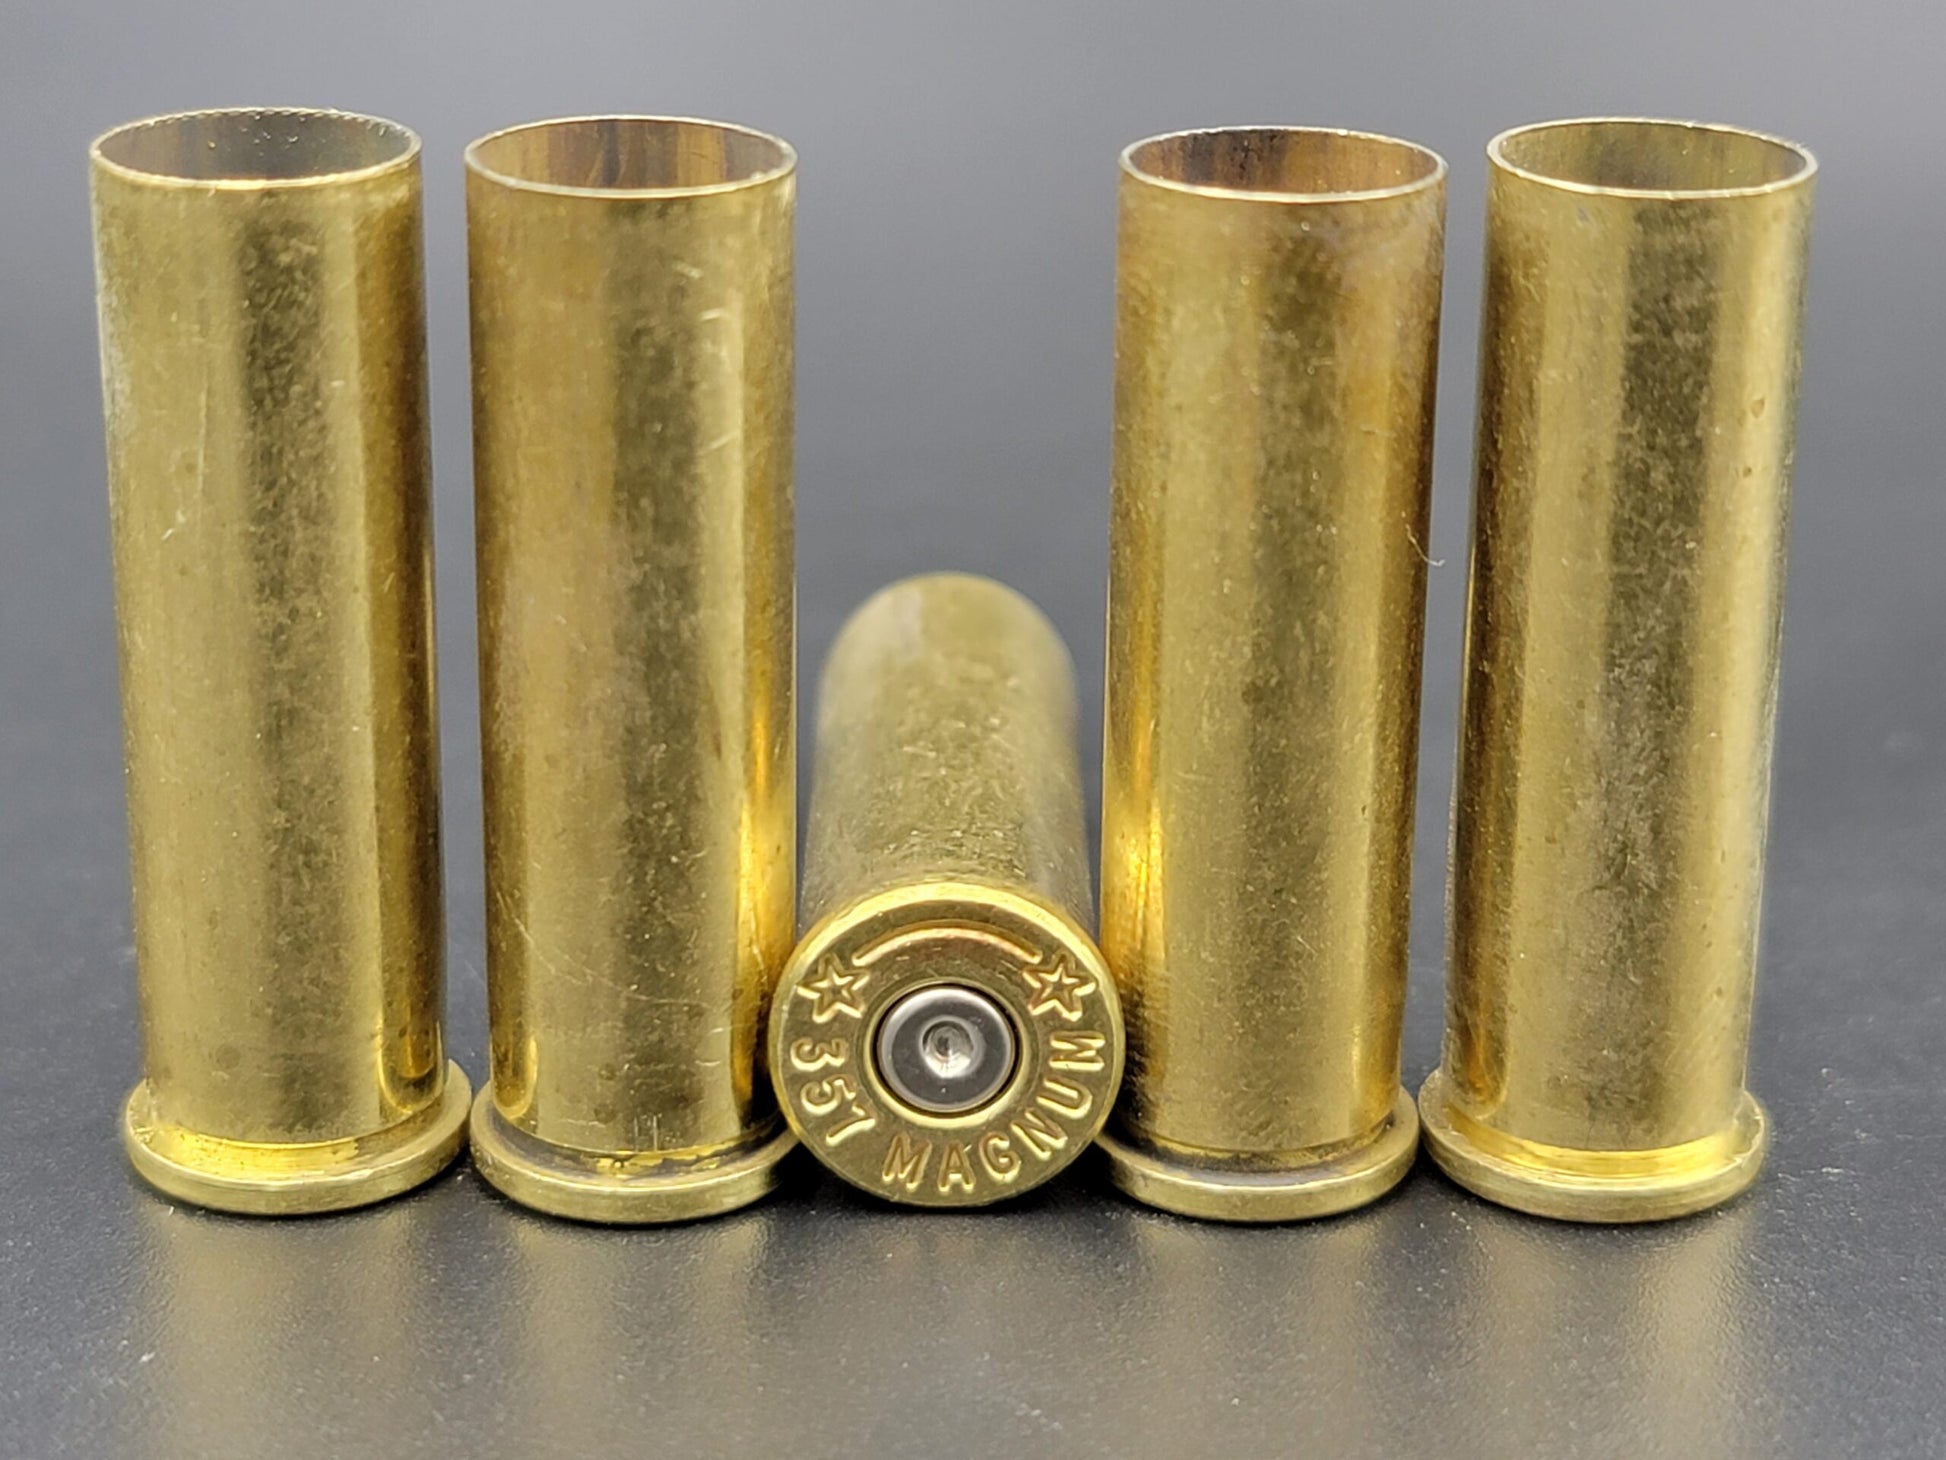 357 Mag once fired pistol brass. Hand sorted from reputable indoor/military ranges for reloading. Reliable spent casings for precision shooting.